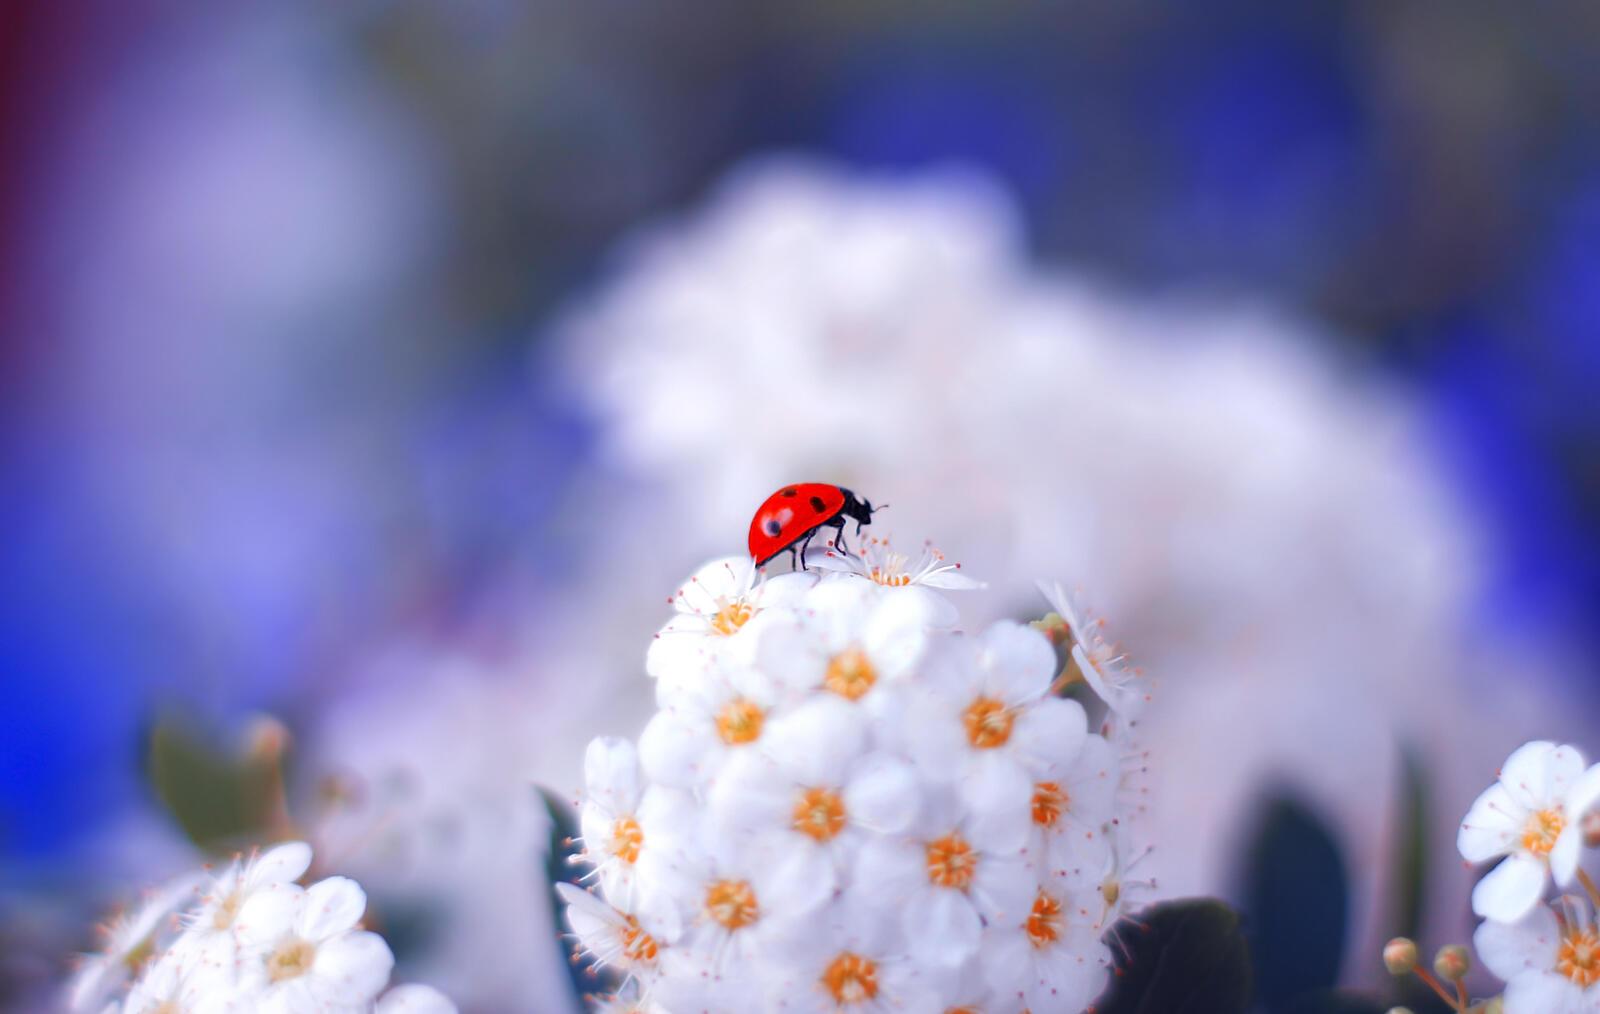 Wallpapers plant macro insects on the desktop